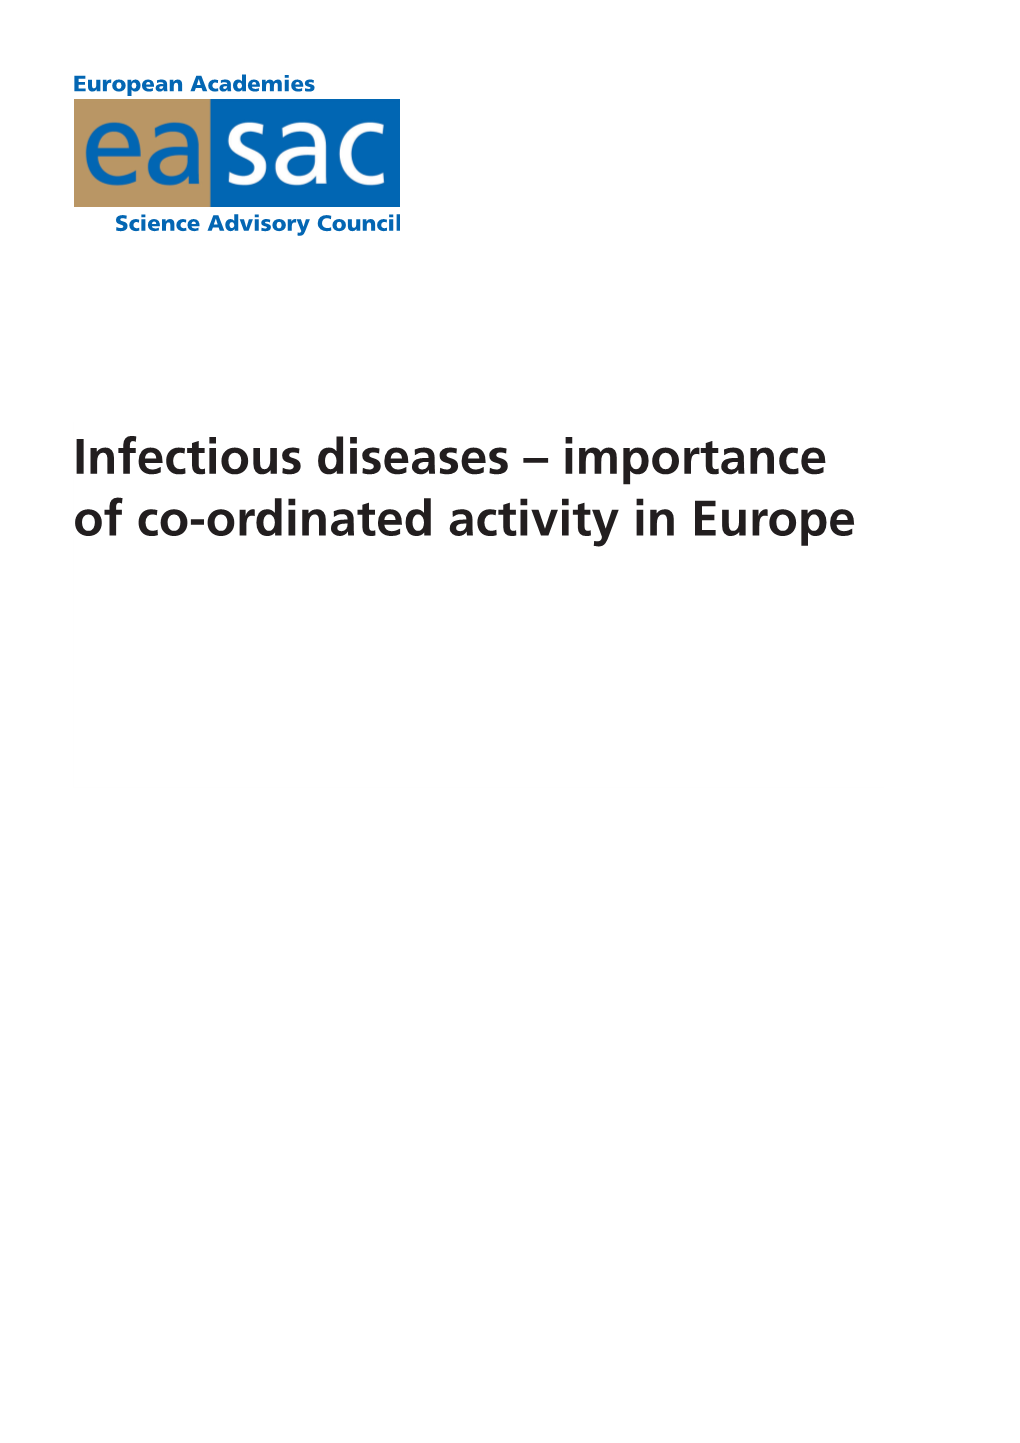 Infectious Diseases – Importance of Co-Ordinated Activity in Europe ISBN 0 85403 614 8